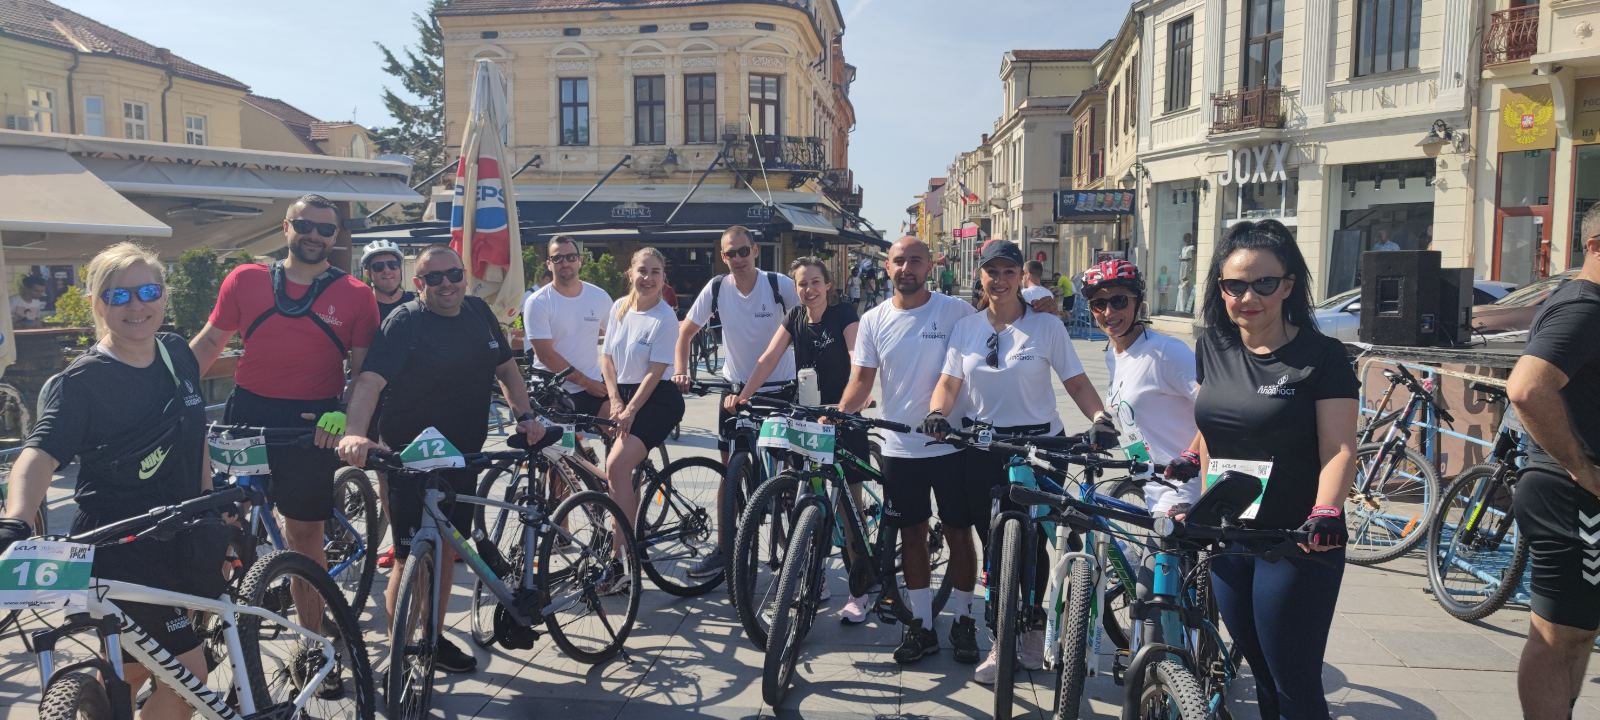 PART OF “PLODNOST” TEAM ON THE BICYCLE RACE “VELO TRKA” IN BITOLA” class=”wplp_thumb” /></span></a><a href=